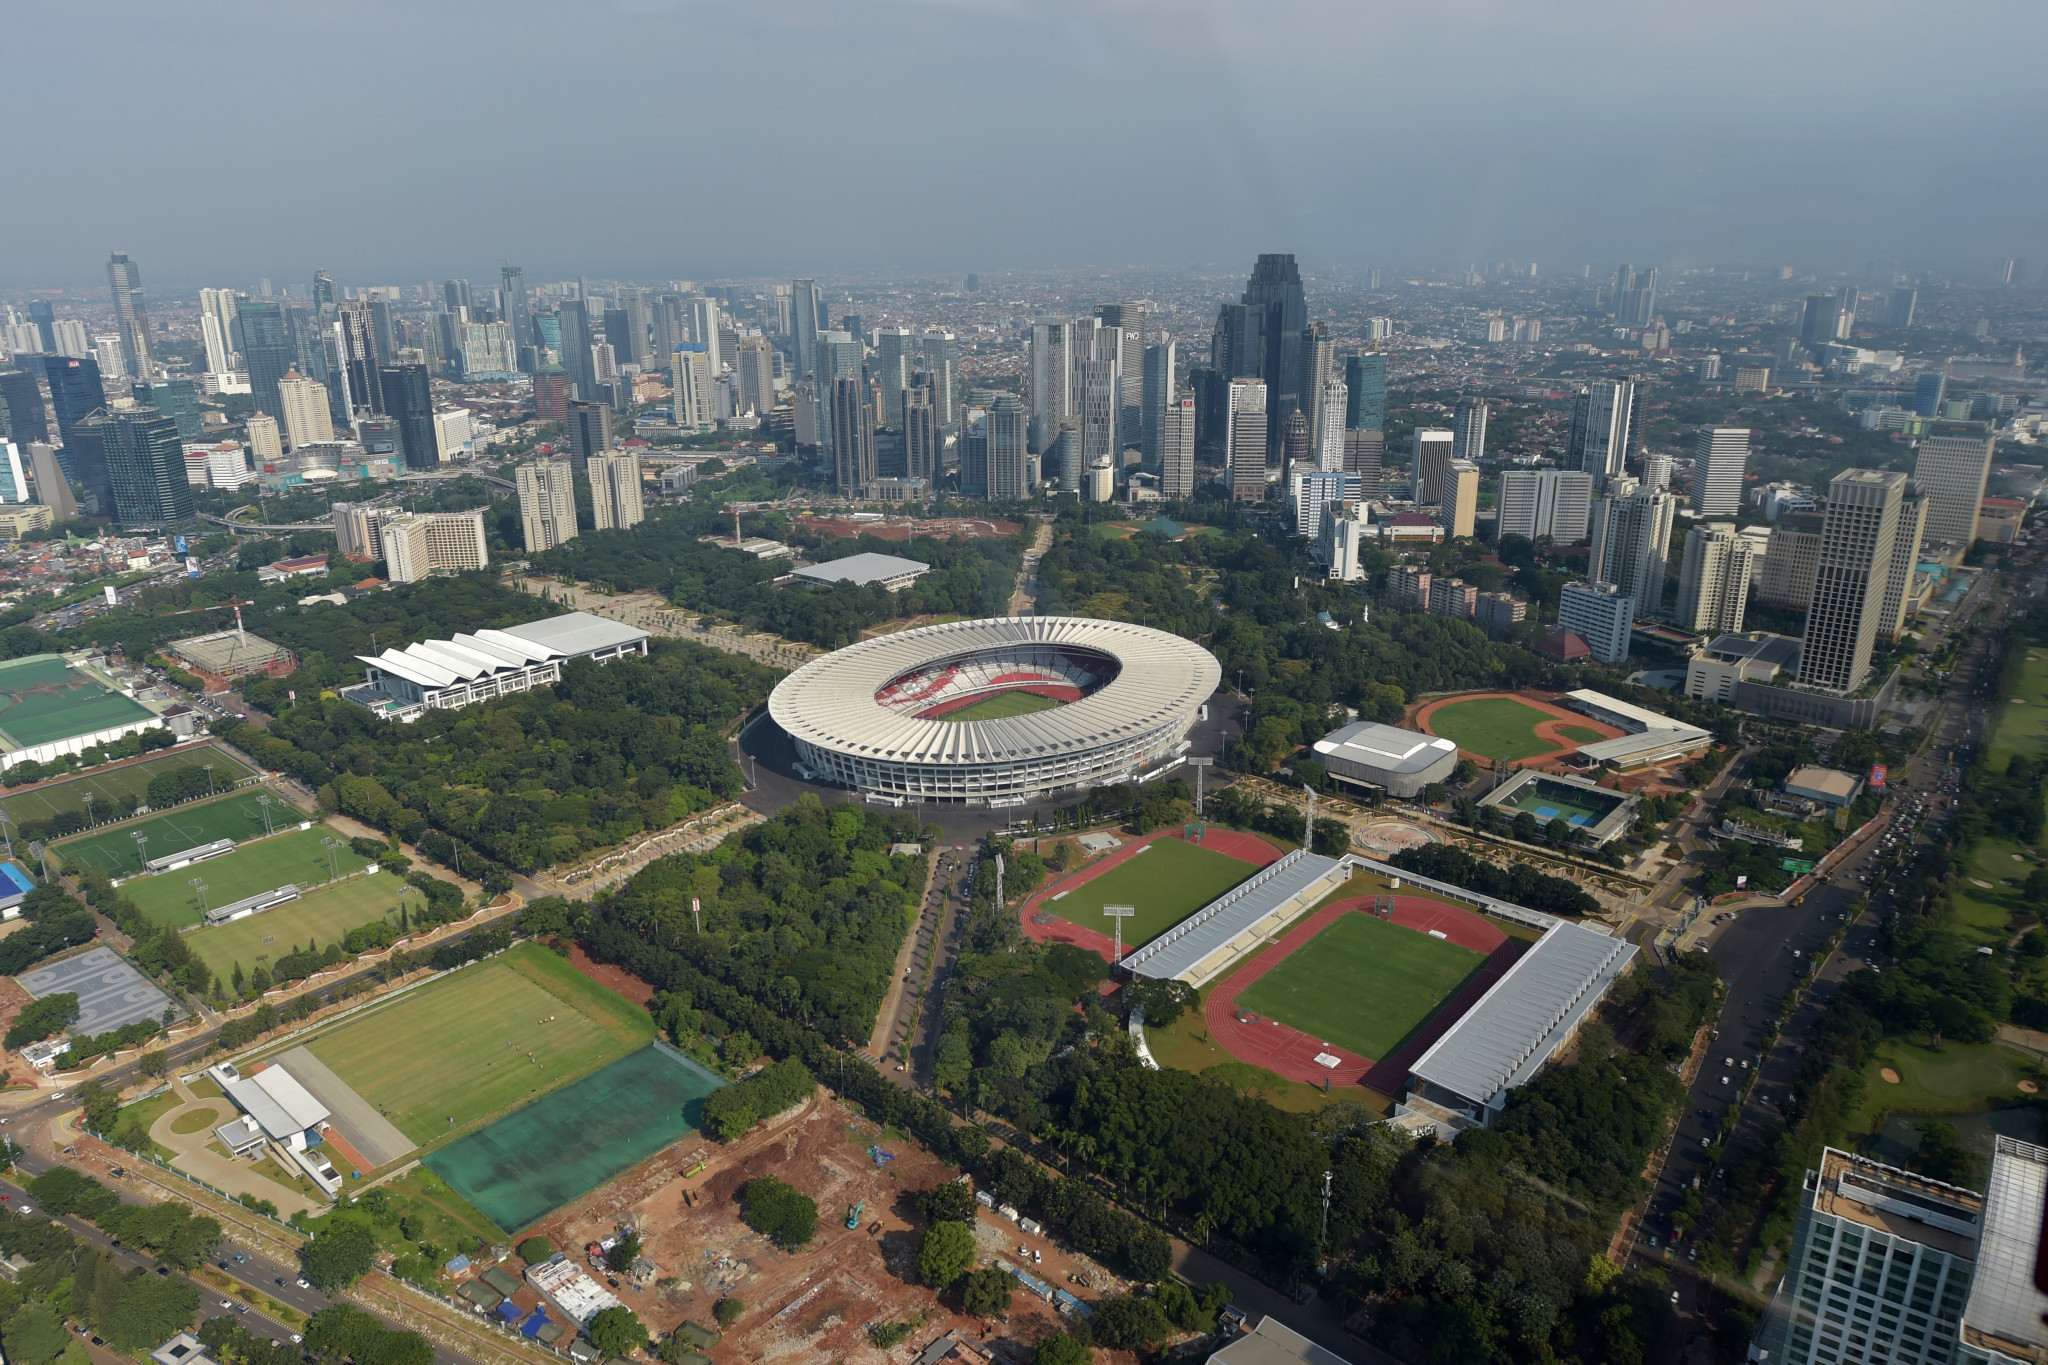 All venues for 2018 Asian Games to be ready by June, Indonesian official claims 